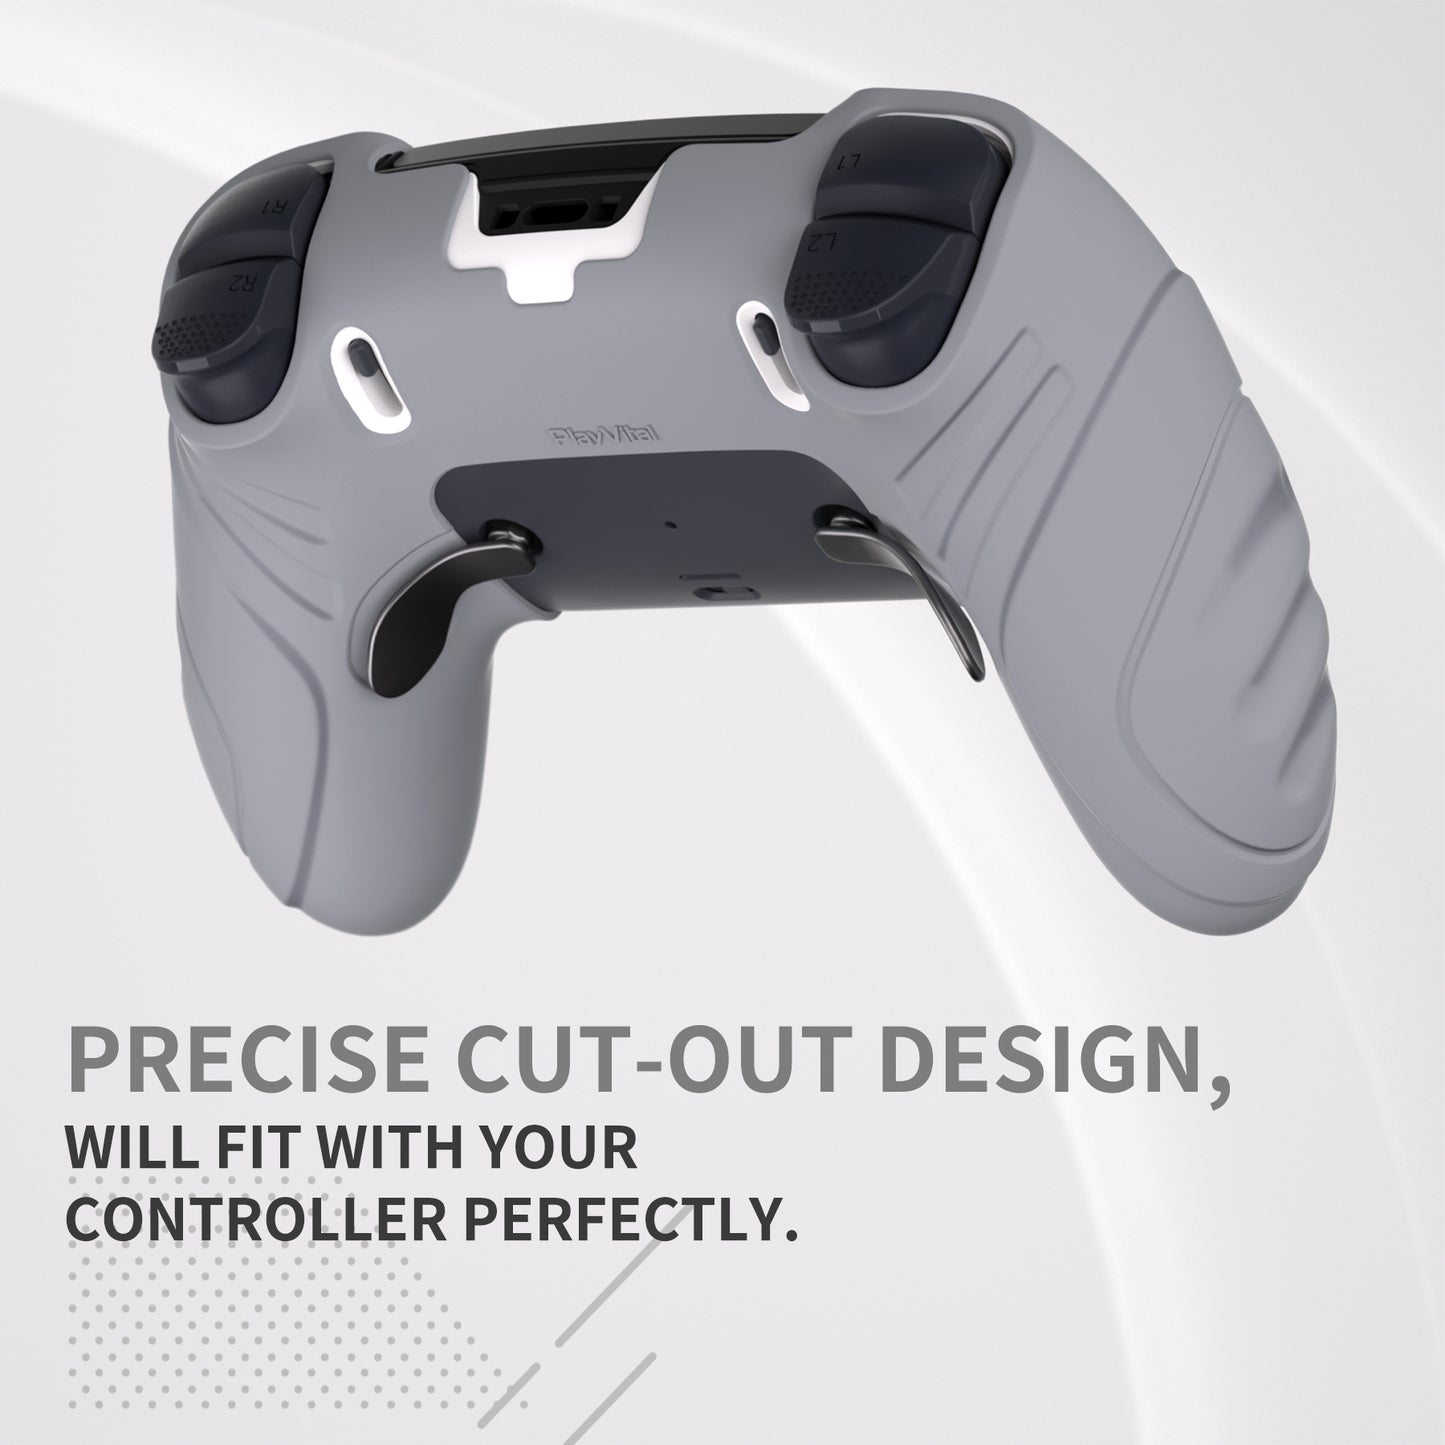 PlayVital Guardian Edition Anti-Slip Ergonomic Silicone Cover Case with Thumb Grip Caps for PS5 Edge Controller - Metallic Gray - EHPFP011 PlayVital